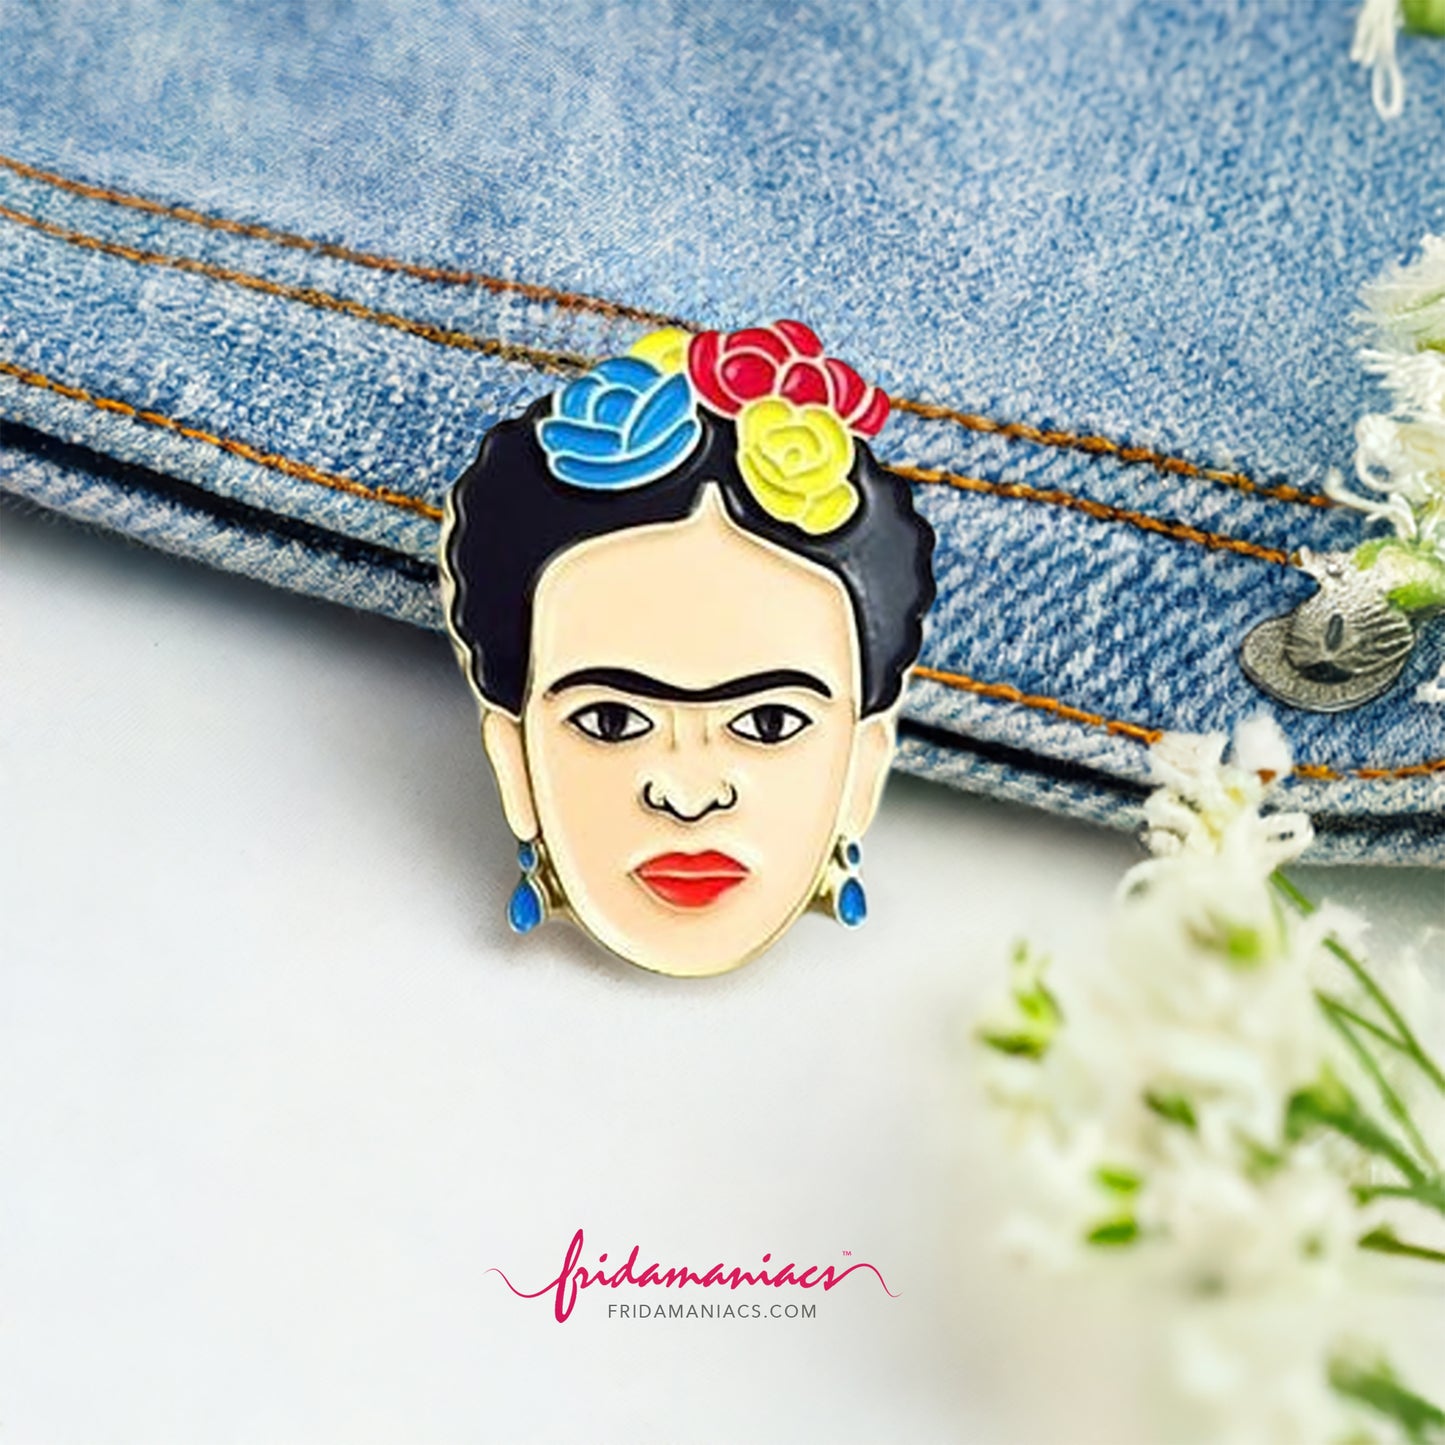 frida kahlo enamel pin with flowers. The best frida kahlo jewelry accessories for girls only at fridamaniacs.com